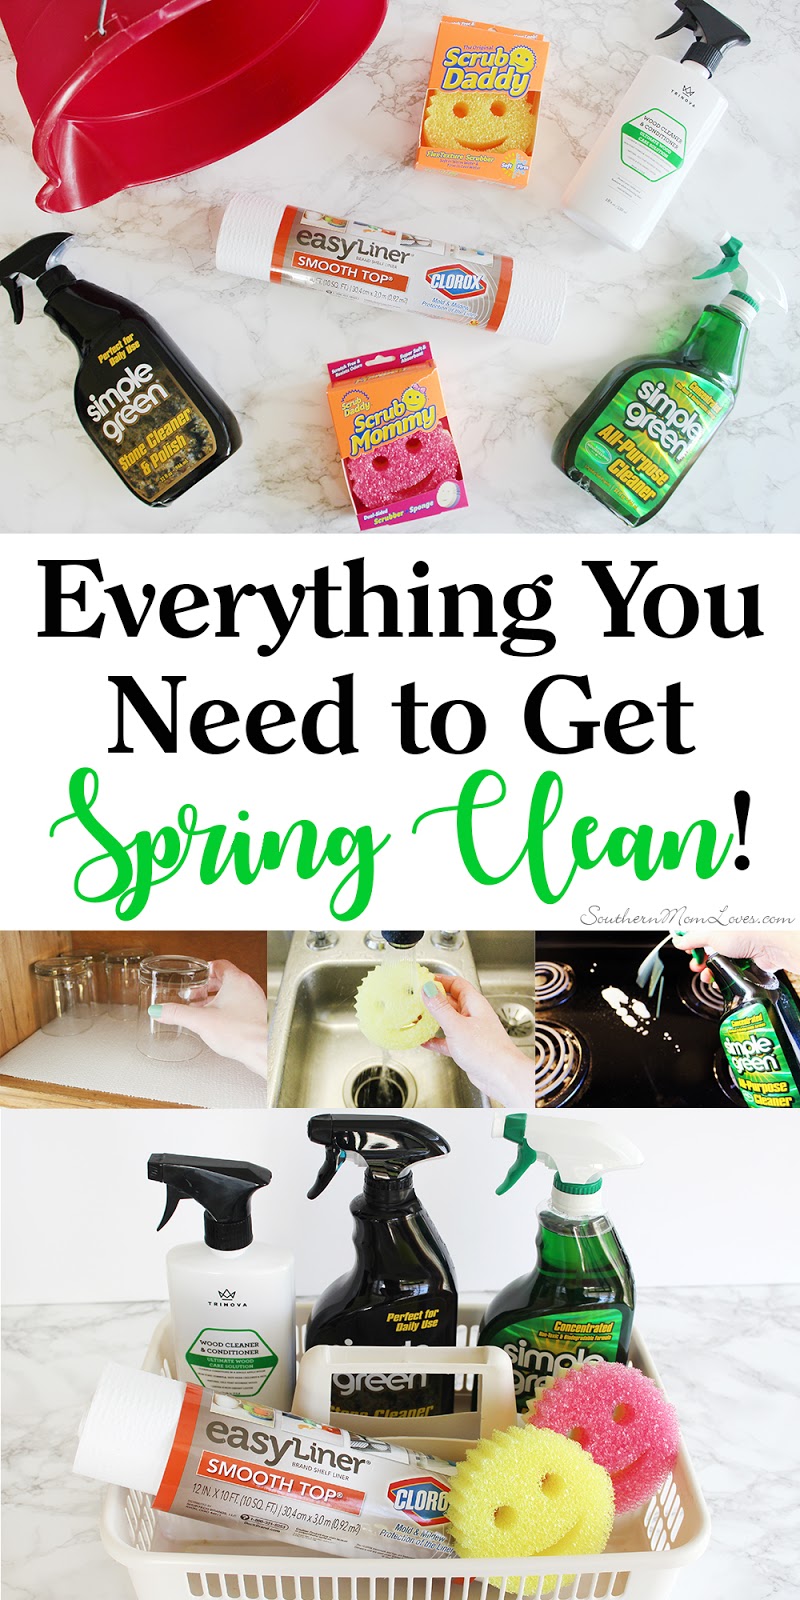 10 must-have spring cleaning products